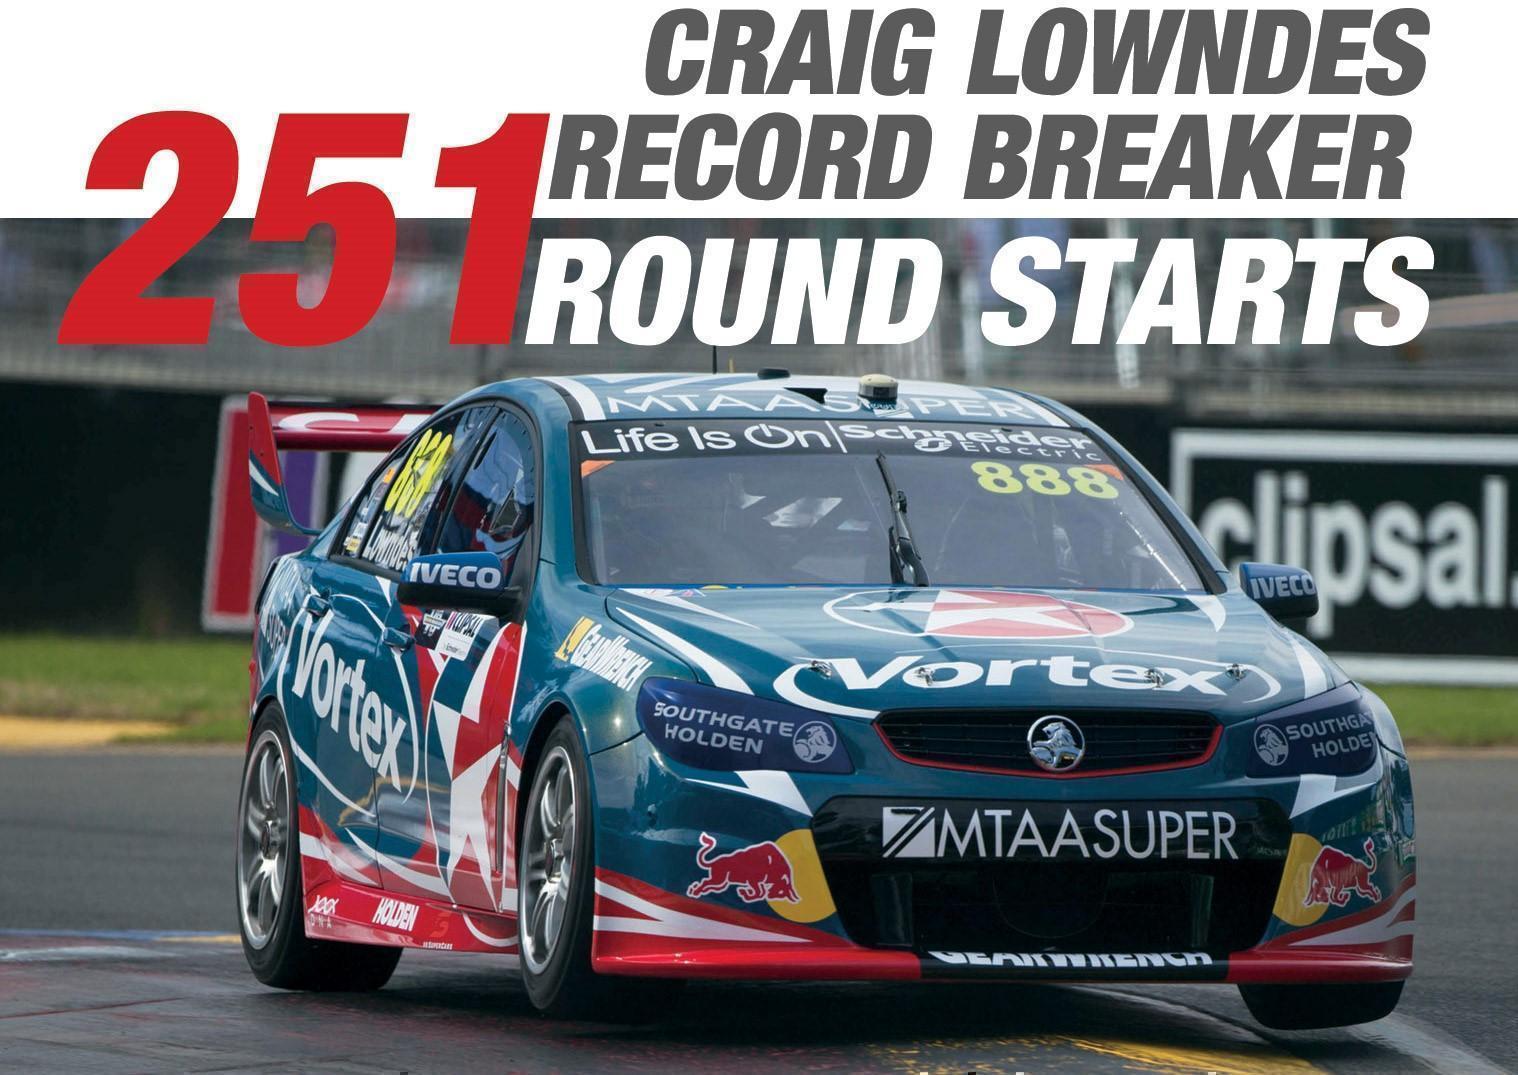 PRE ORDER - Craig Lowndes Record Breaker 251 Round Starts Championship Series Team Vortex Holden Commodore 2016 888 Racing V8 Supercar 1:18 Scale Die Cast Model Car (FULL PRICE $169.00)